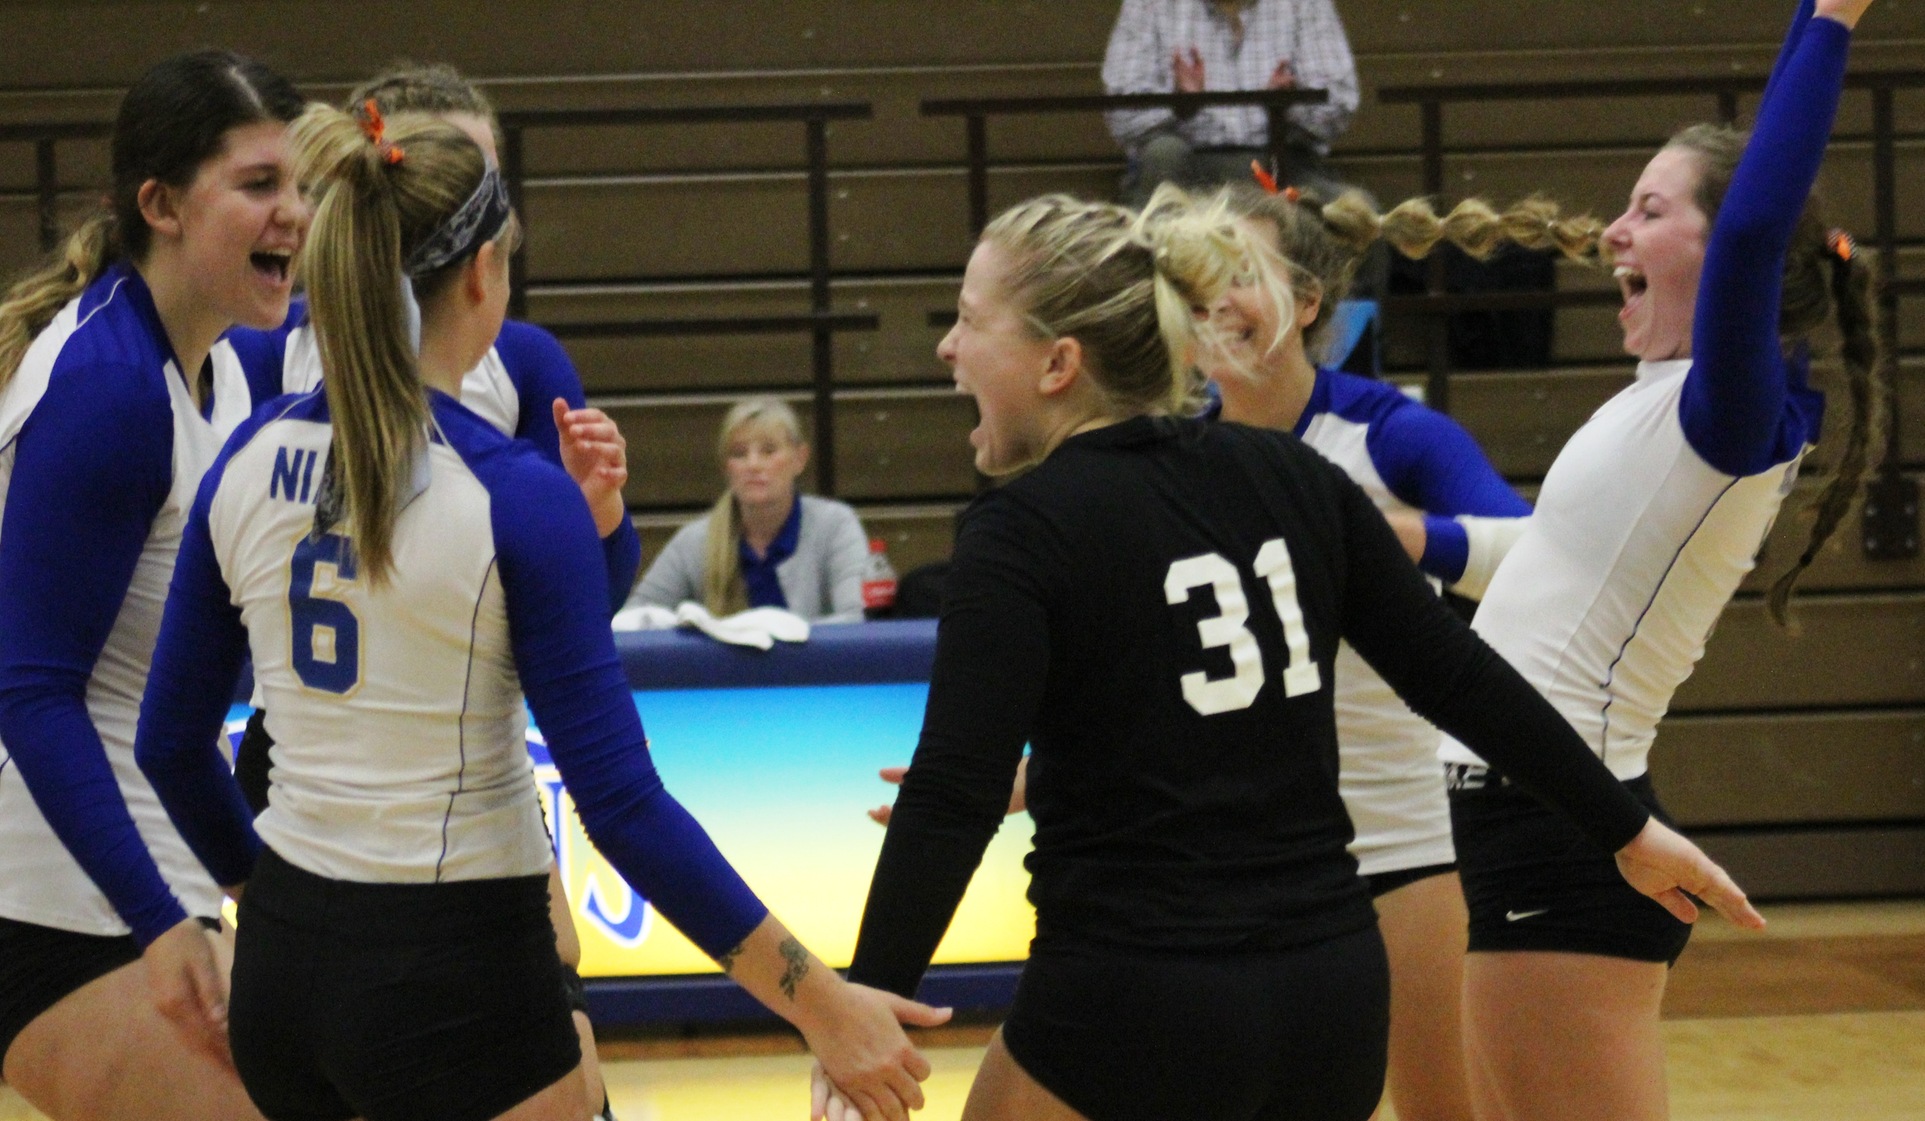 NIACC players celebrate a point in Friday's match against DCTC.